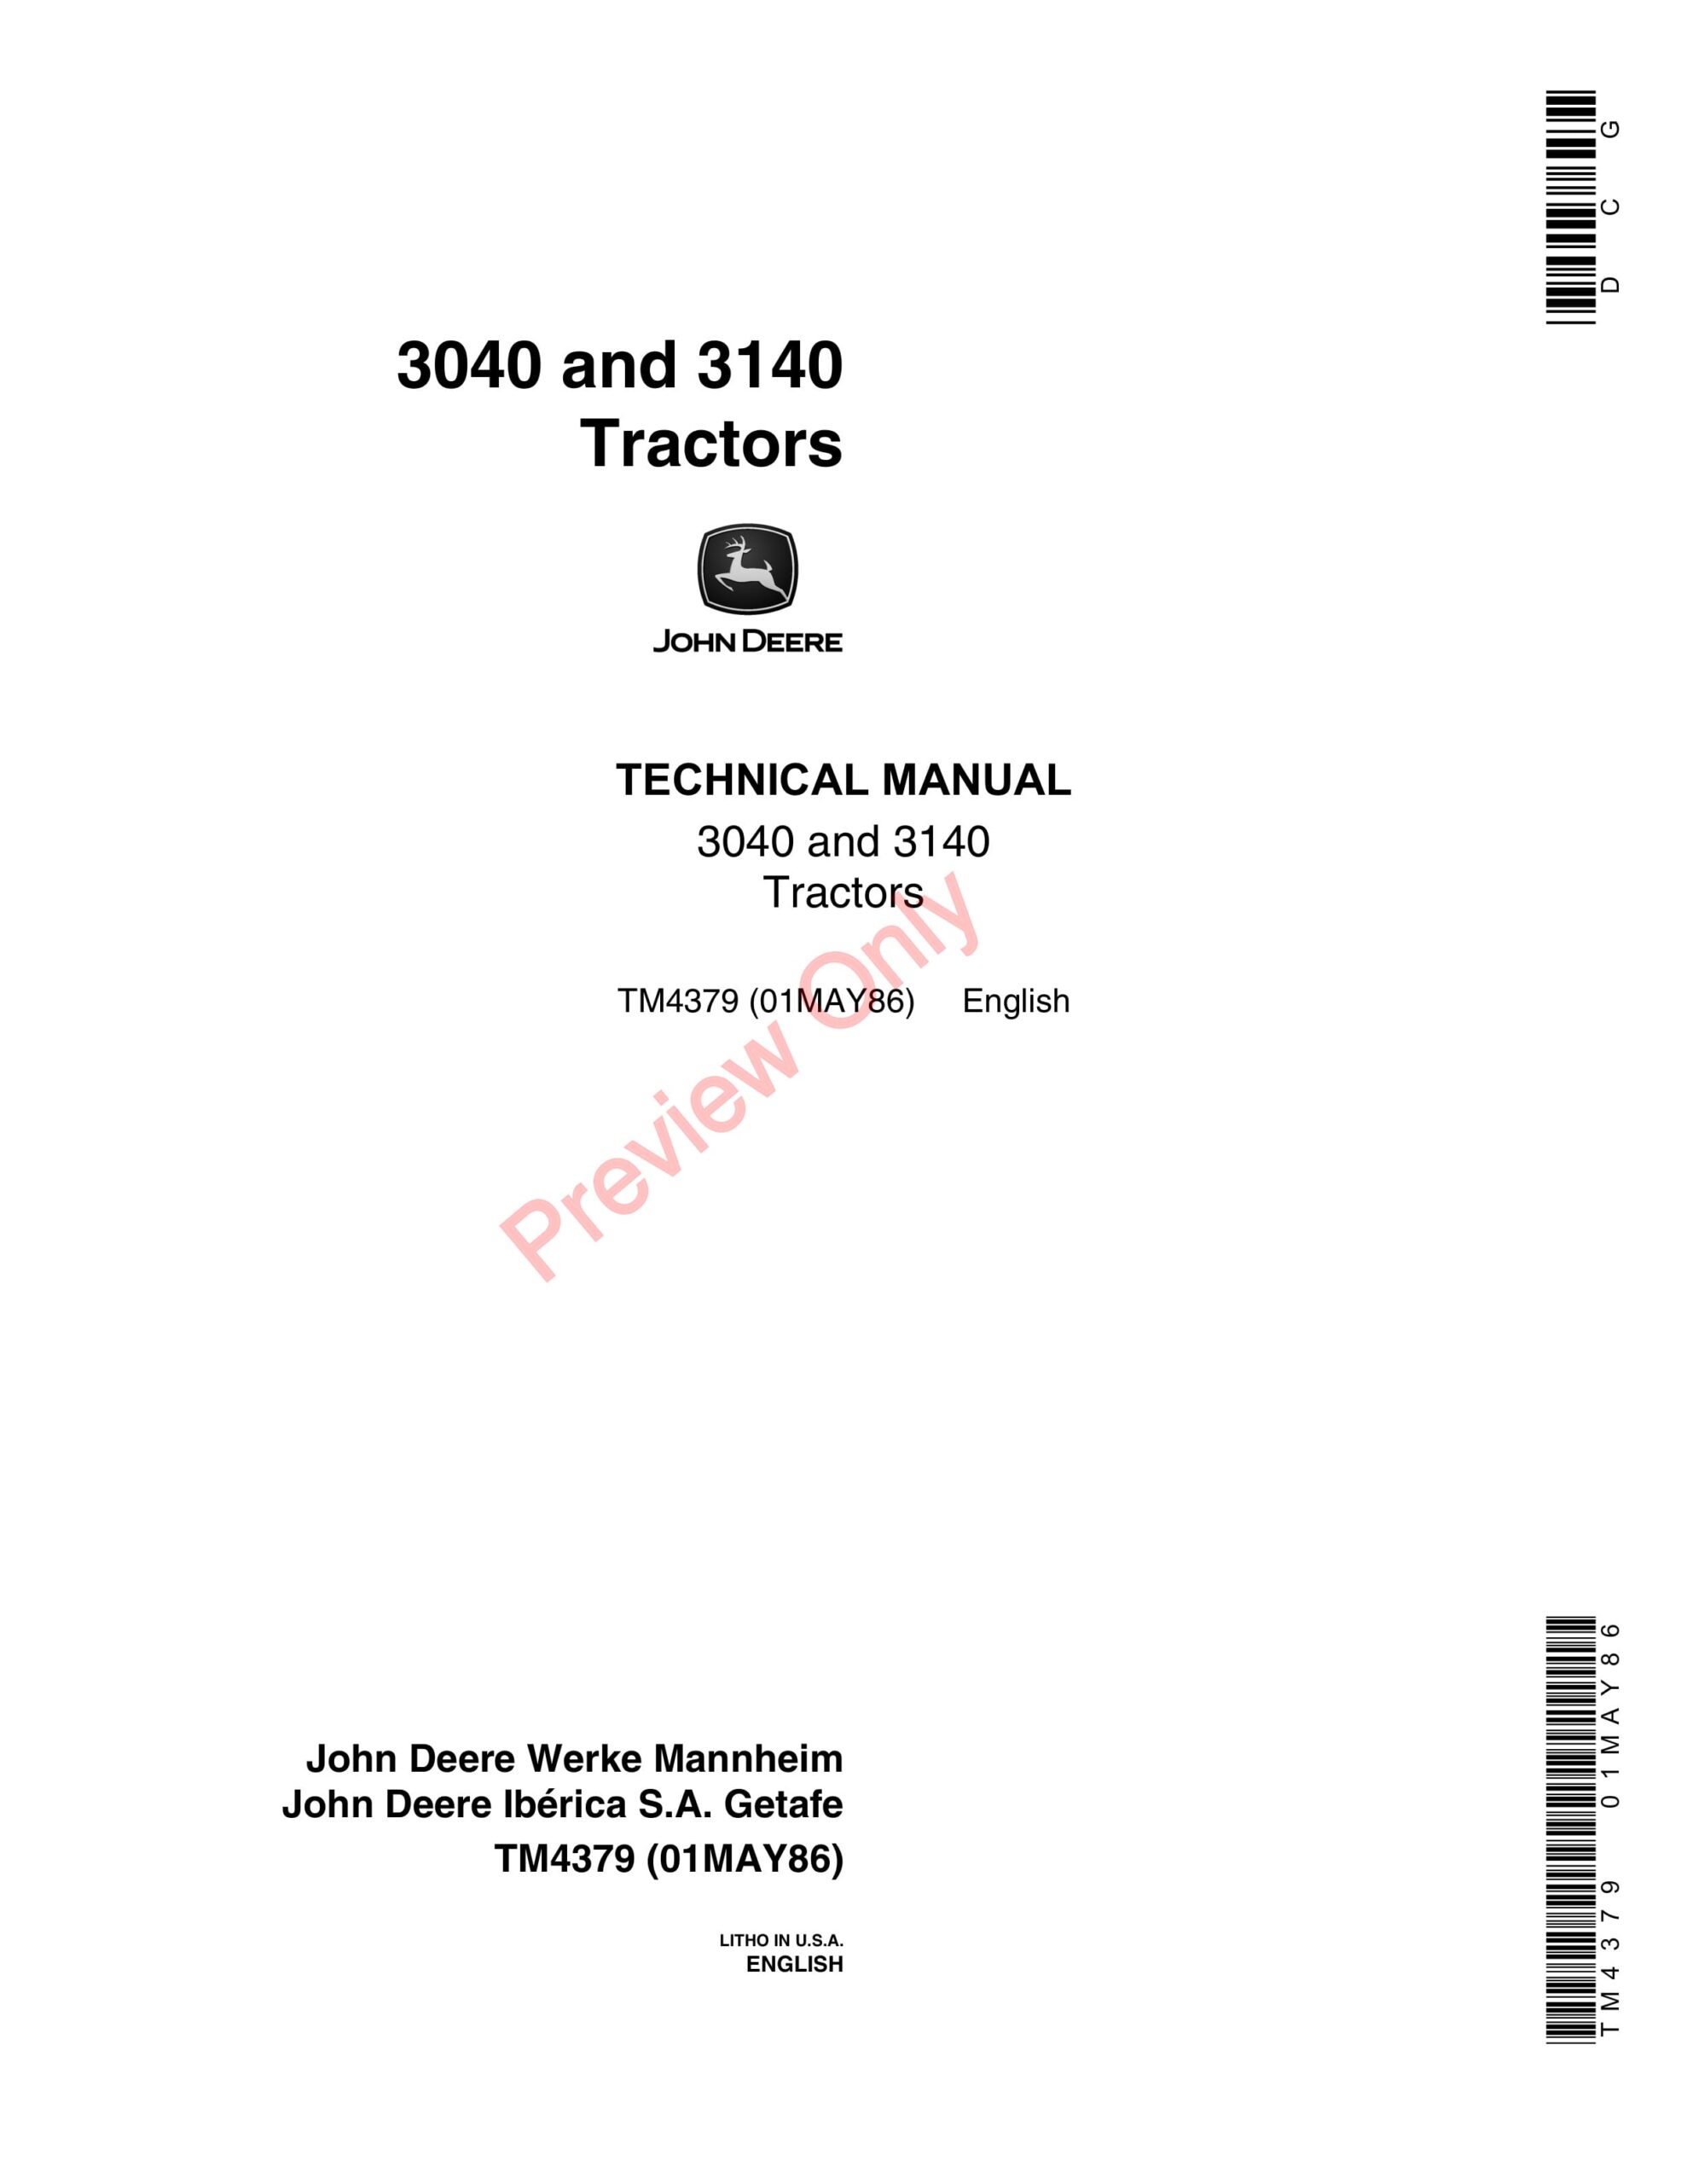 John Deere 3040 and 3140 Tractor Technical Manual TM4379 01MAY86-1